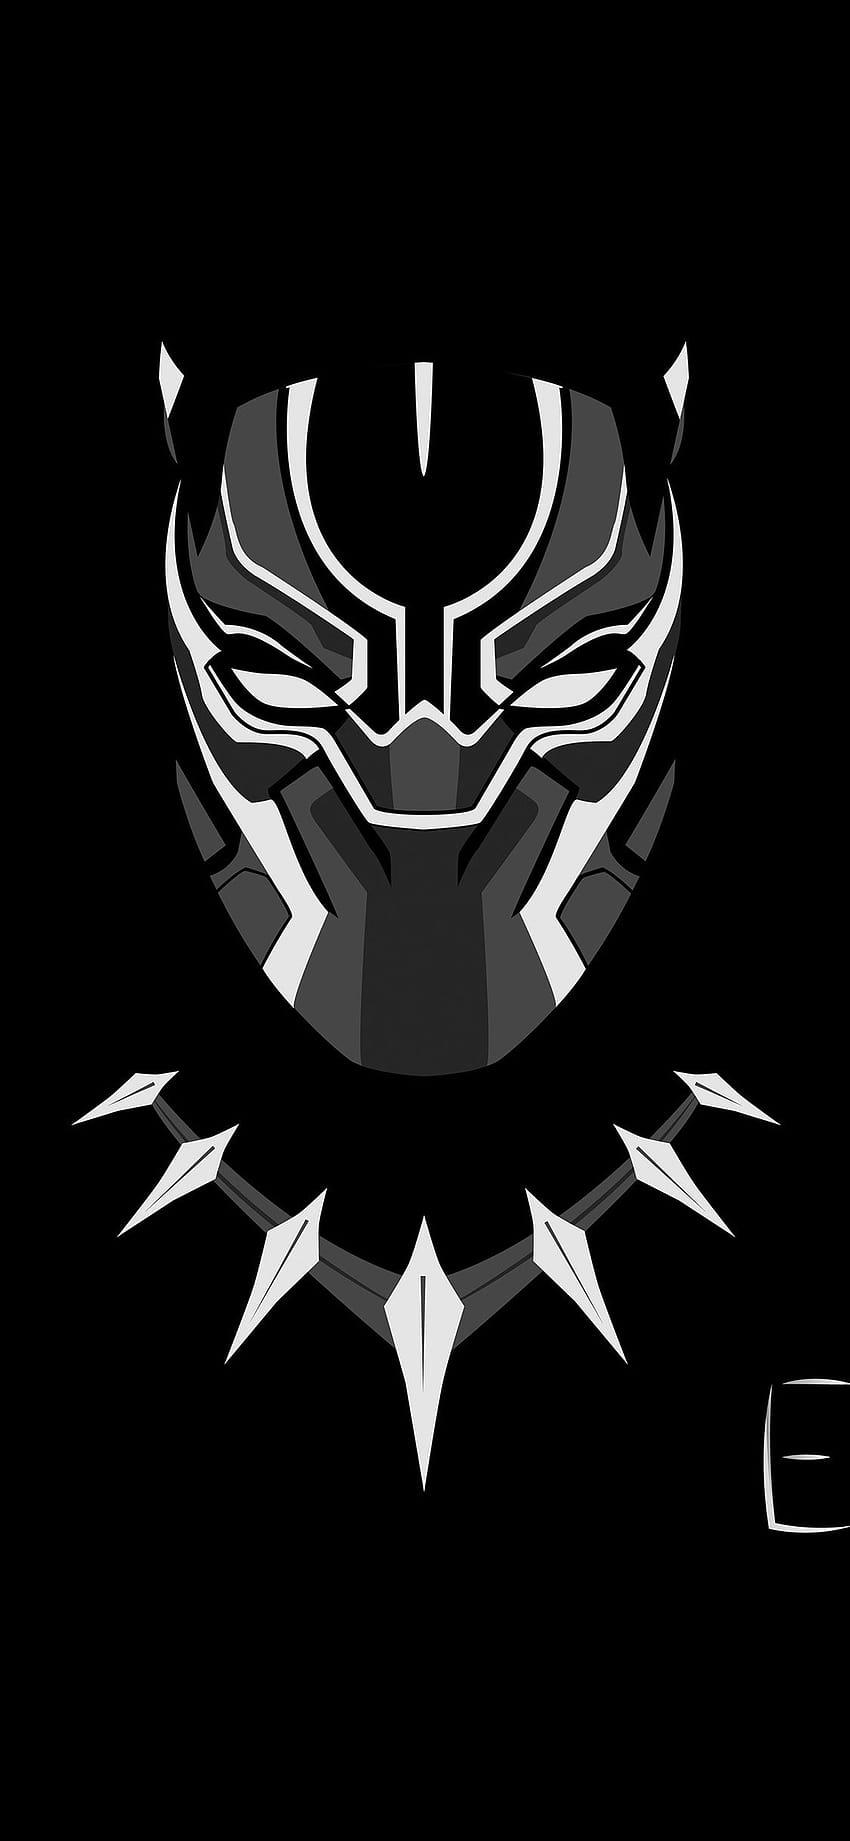 1125x2436 Black Panther Minimalism Iphone XS,Iphone 10,Iphone X , Backgrounds, and, dark for iphone HD phone wallpaper